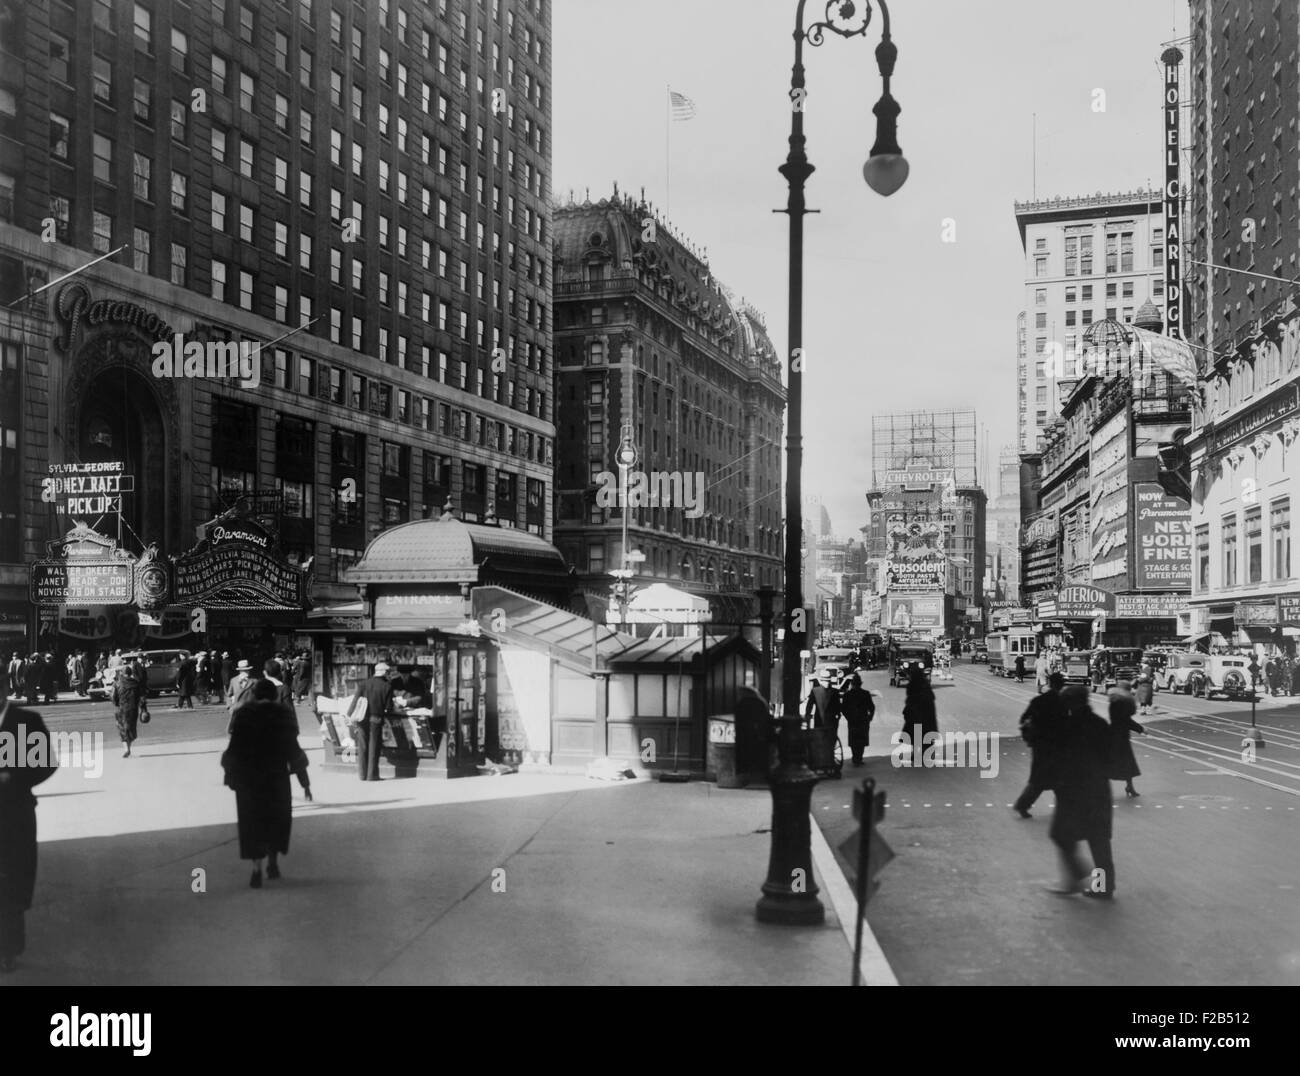 Times Square and Broadway, New York City, ca. 1933. At left, the Paramount Theater marquee promotes the movie PICK-UP with George Raft and Sylvia Sidney. - (BSLOC 2015 1 161) Stock Photo